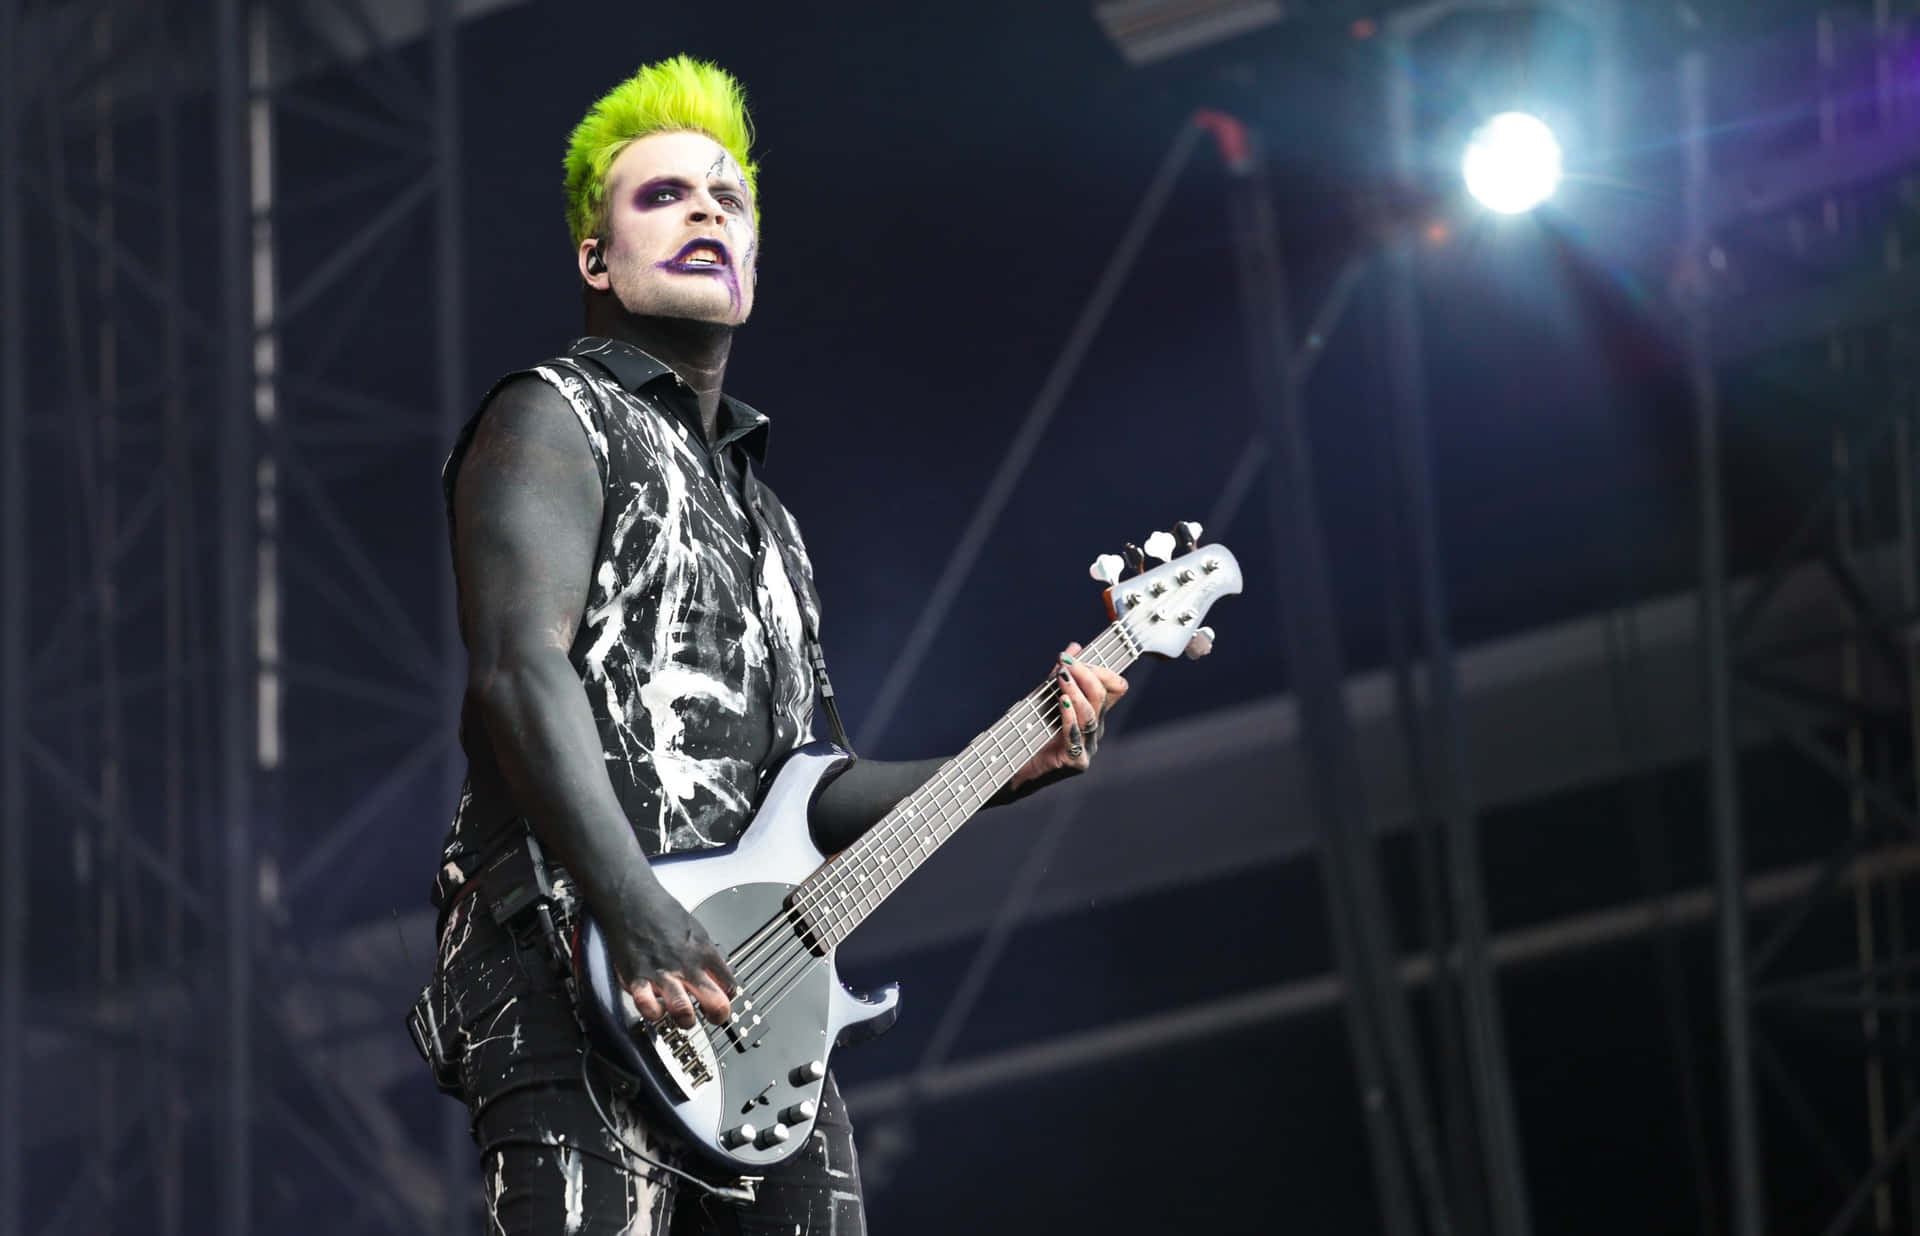 Green Haired Bassist On Stage.jpg Wallpaper